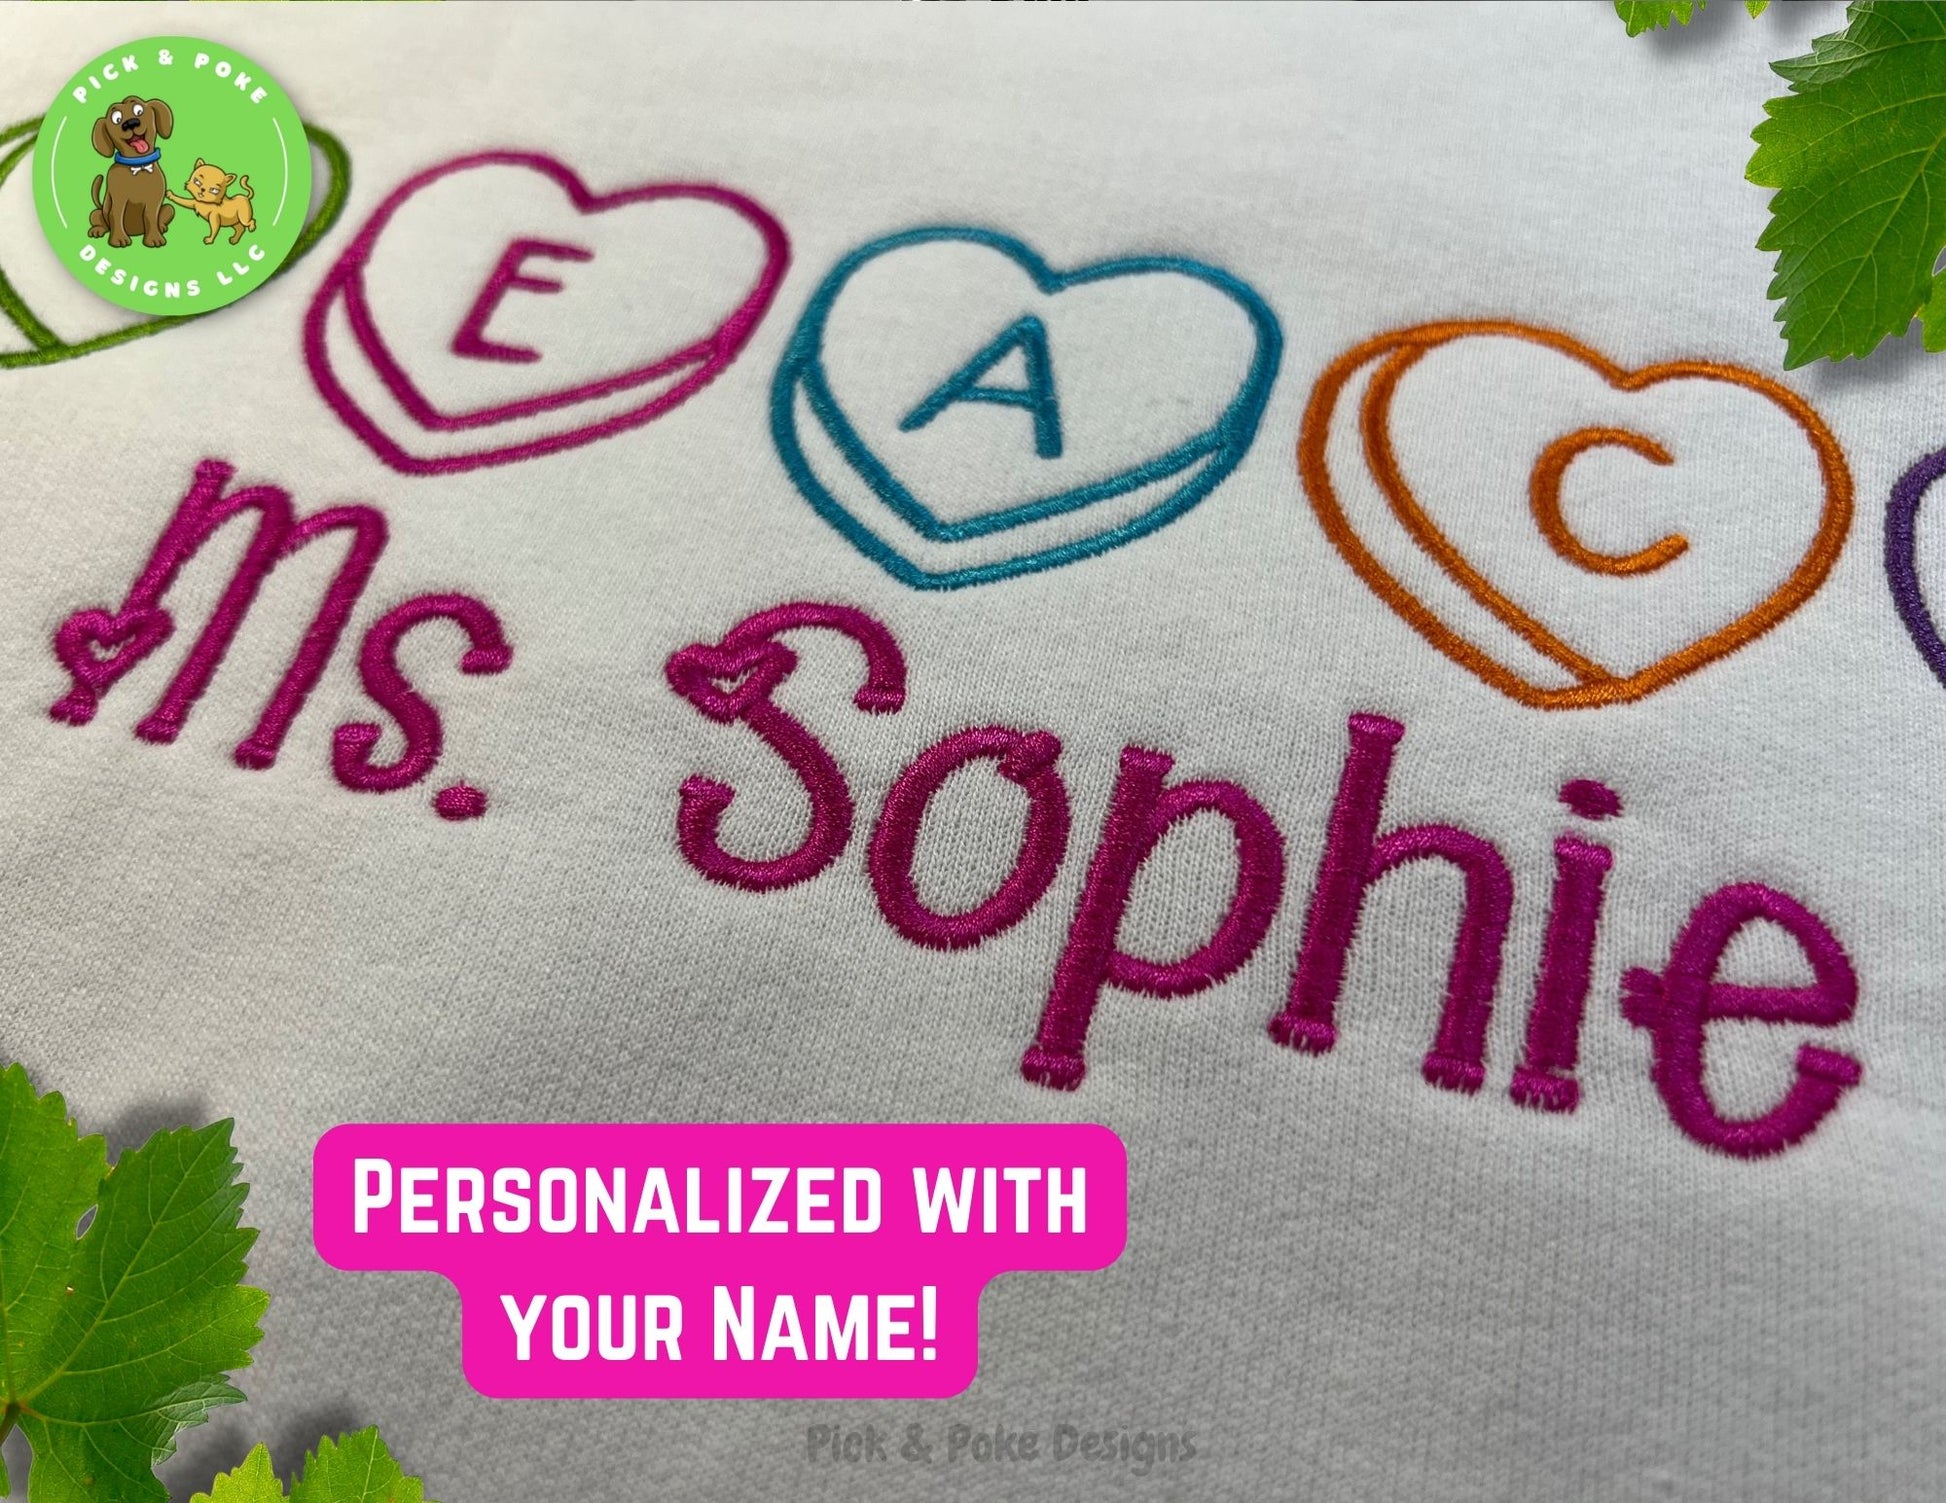 Teach shirt is personalized with your name for a custom piece of clothing that shows your school spirit. 